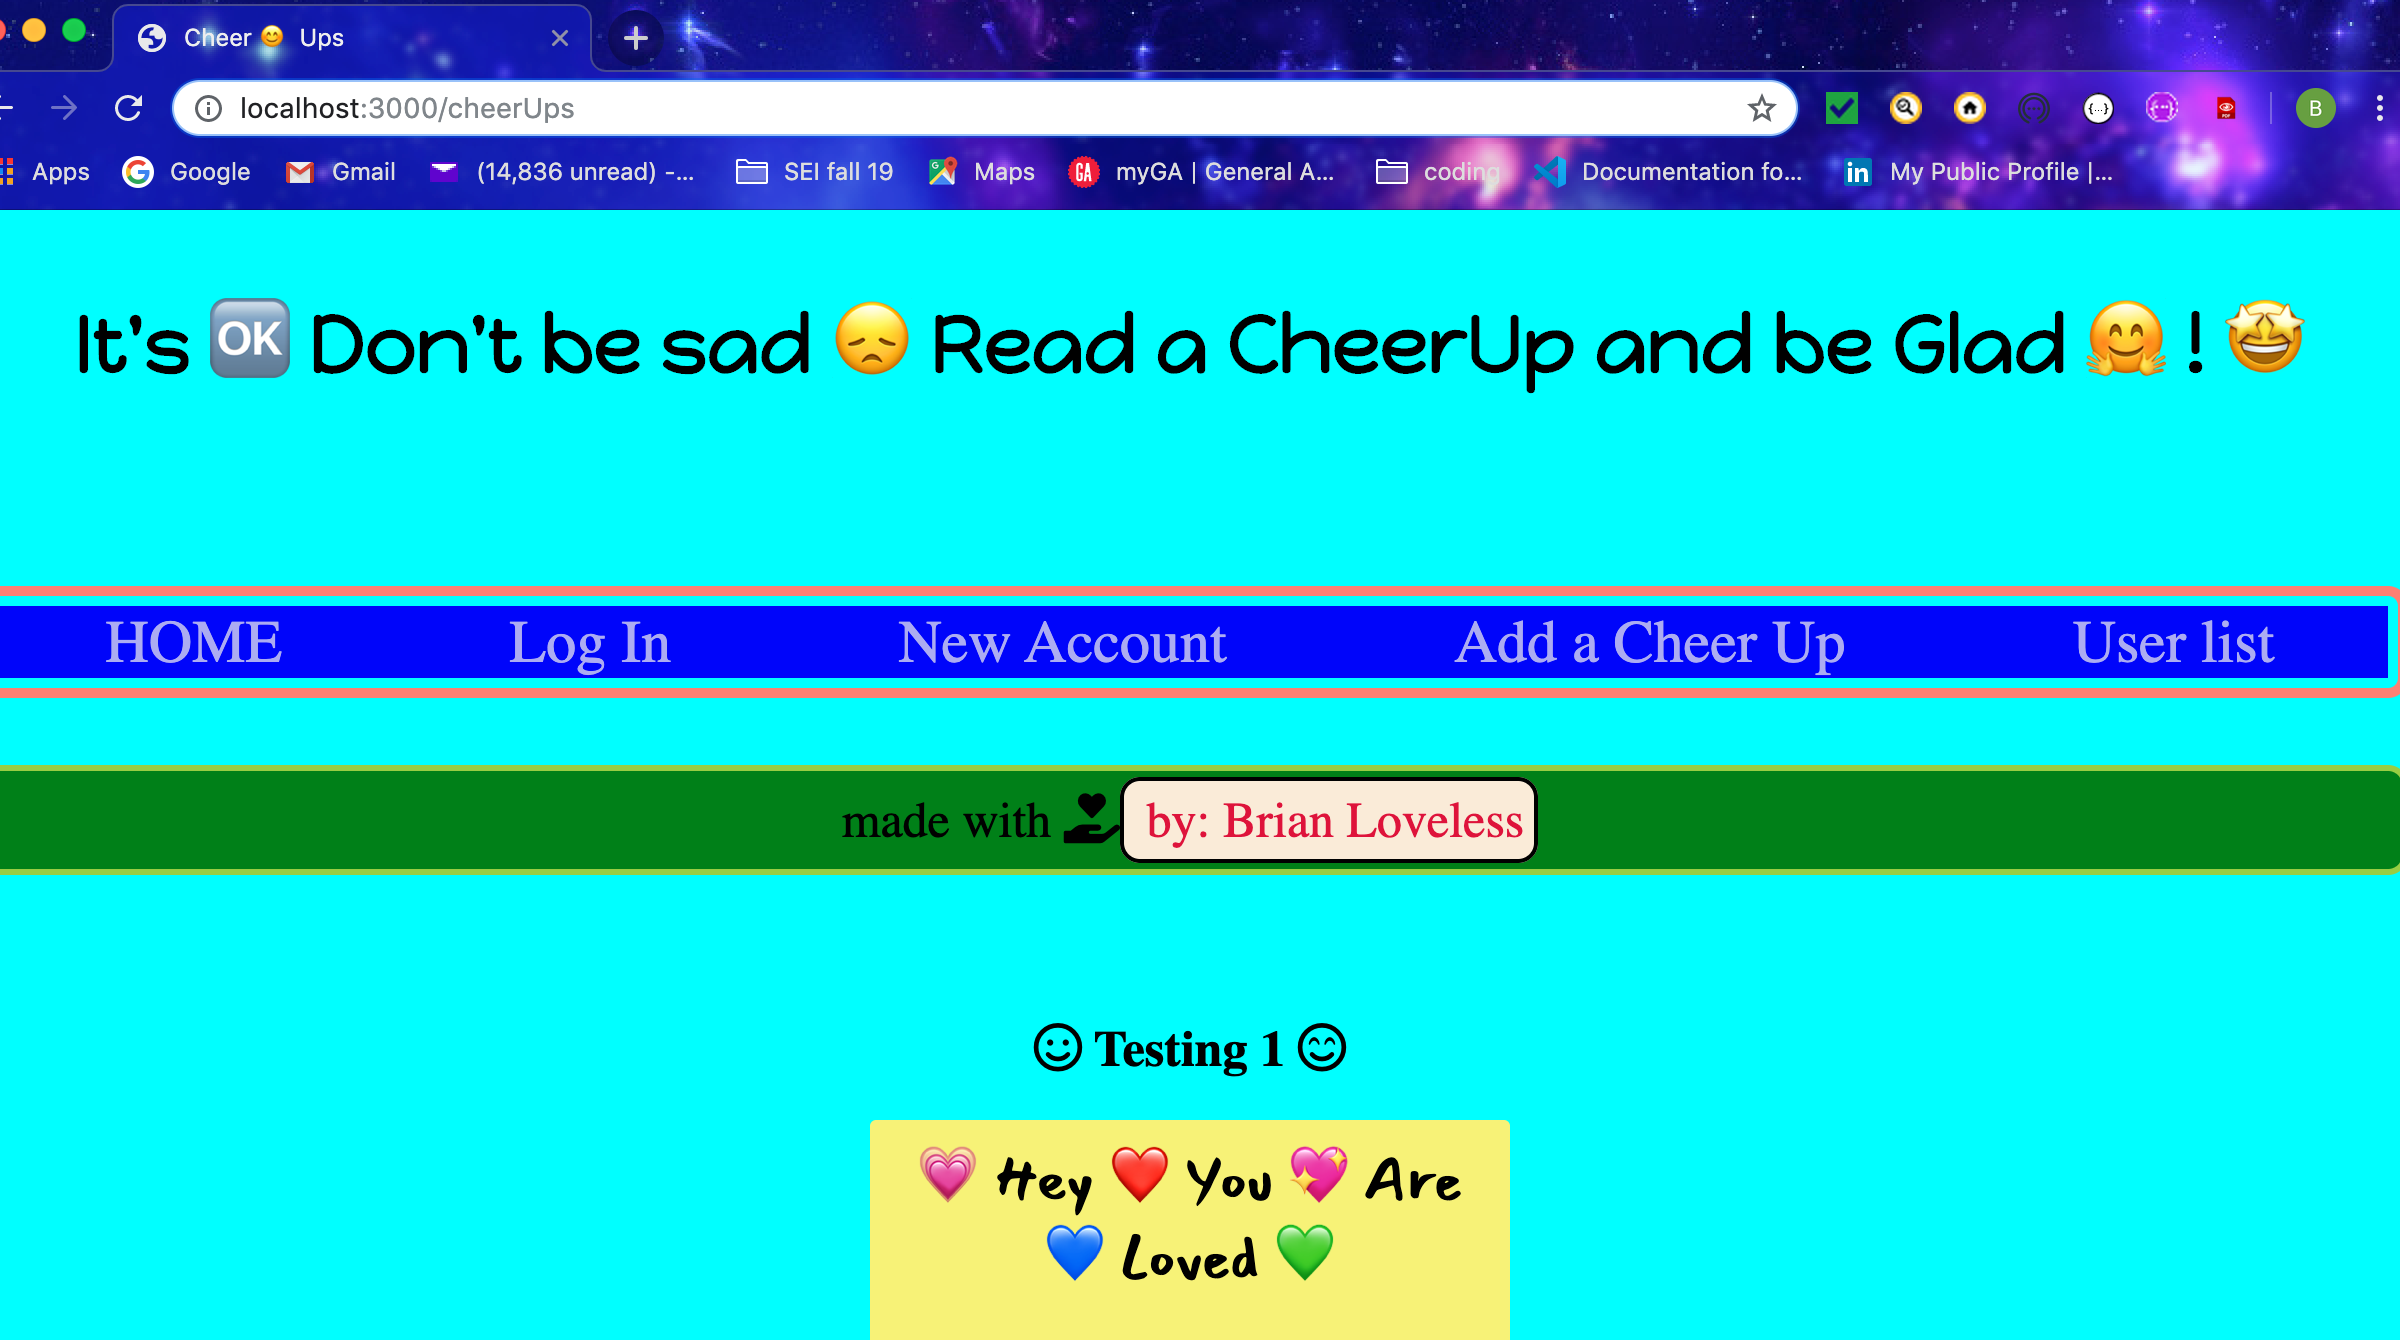 home page of cheer ups app BL designed